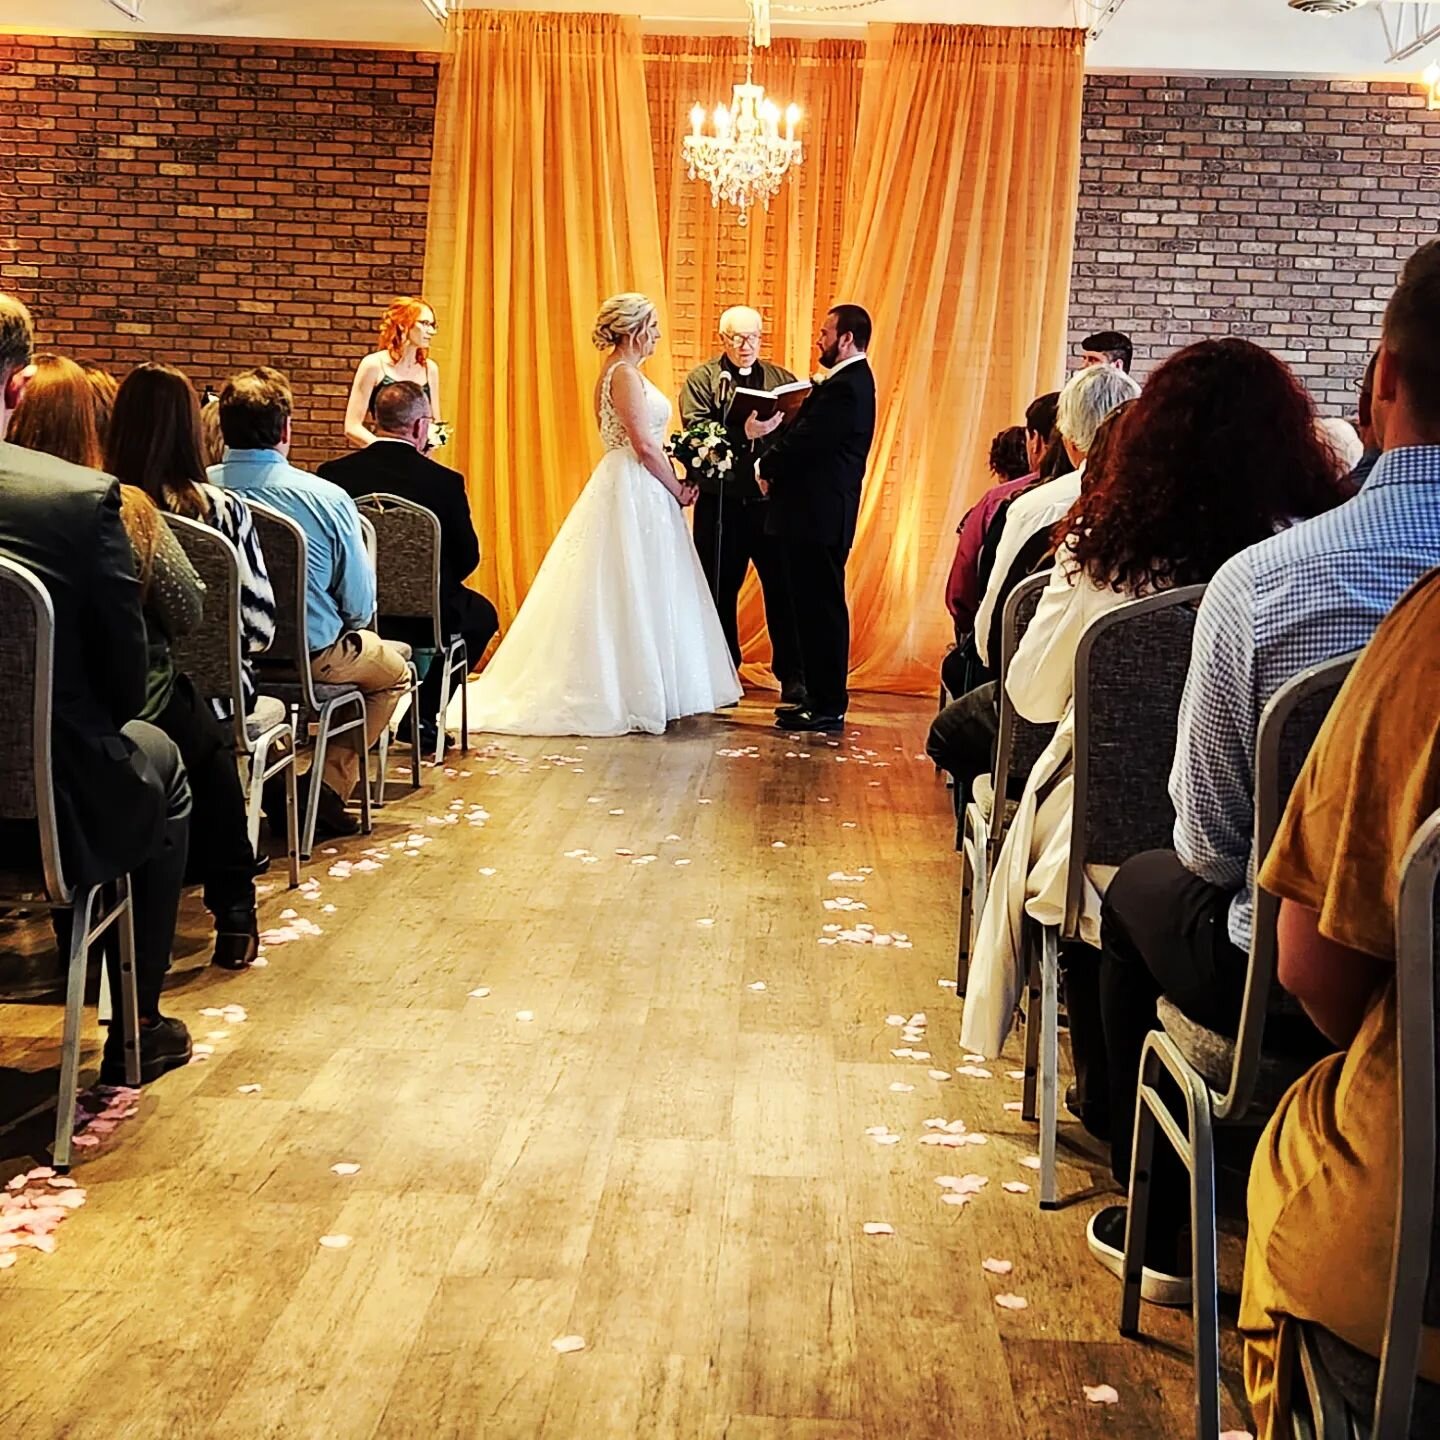 Learn to love like the Winkels! Congratulations to Kathi Opsah &amp; Mitchel Winkels! It was an honor to help you celebrate your big day!

The Winkels crew:
📷/📹- @lollipopmedia_mn
💍- @jaredthegalleriaofjewelry
🍲- @sscustomcatering 
👰- @theweddin